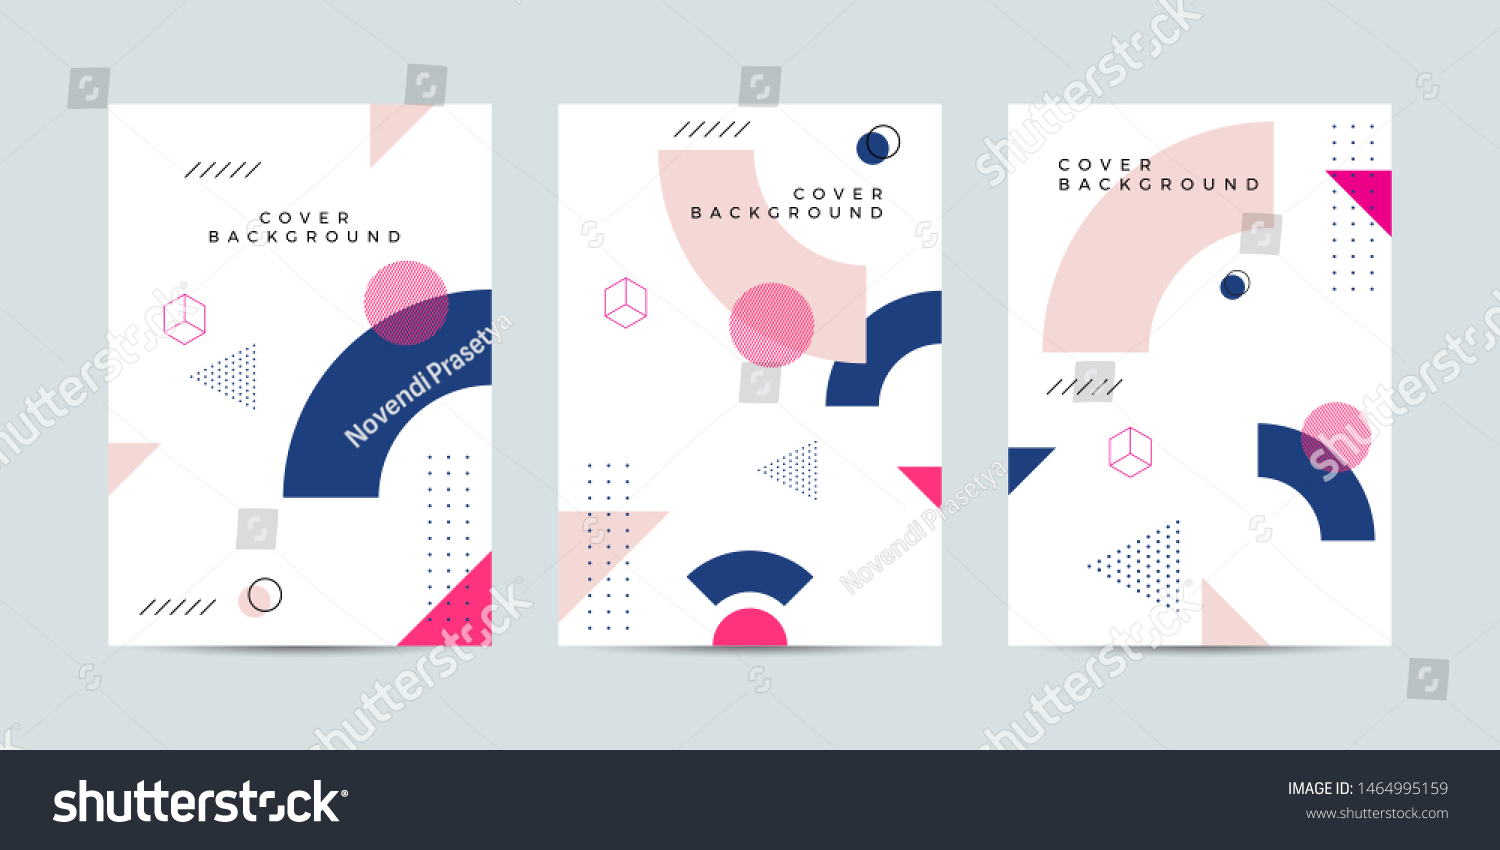 SVG of Covers with minimal design. Cool geometric backgrounds for your design. Applicable for Banners, Placards, Posters, Flyers etc svg